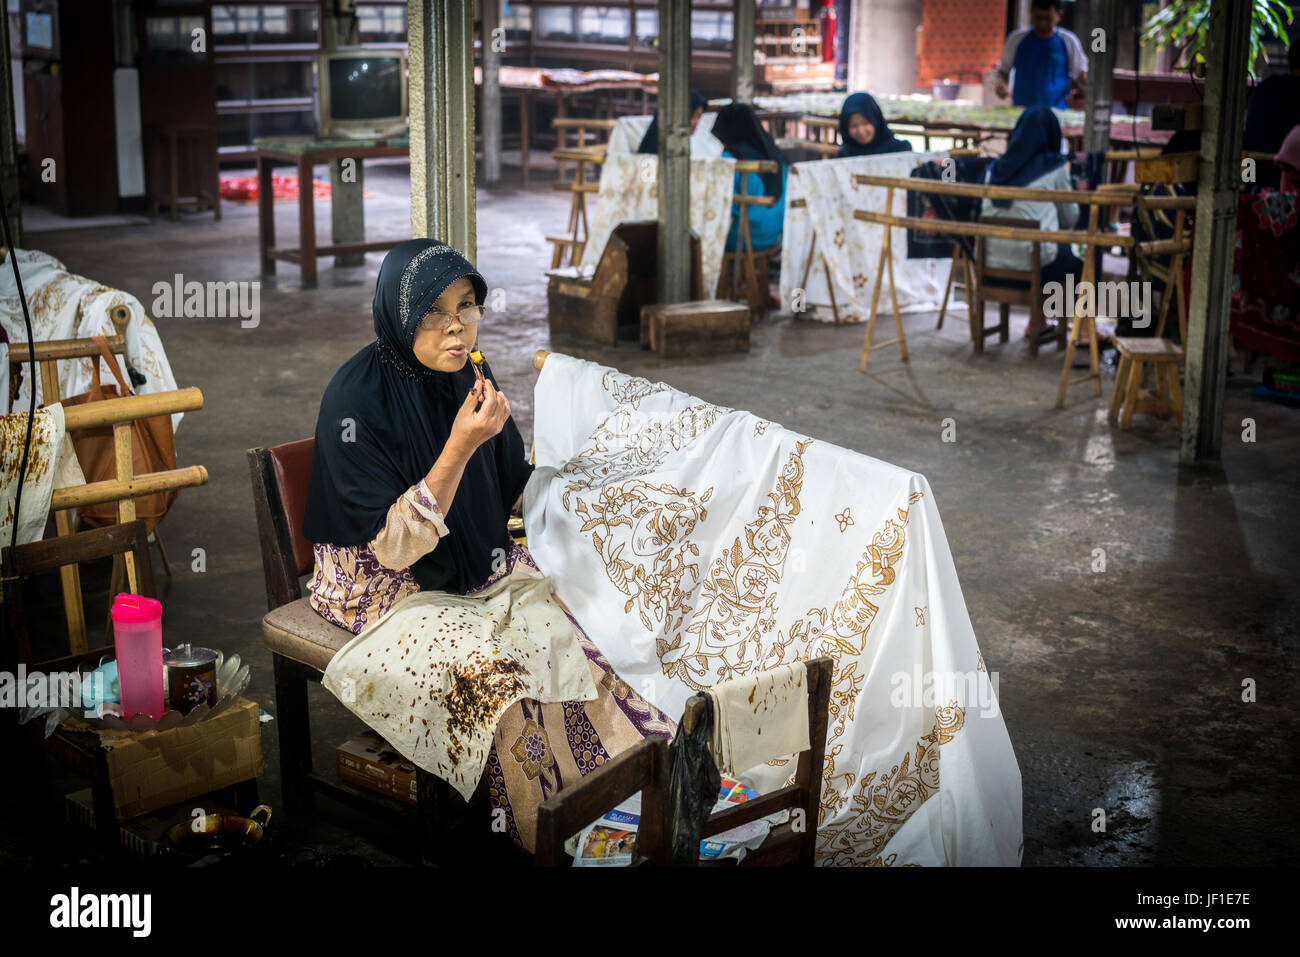 Several people working in a batik workshop in Indonesia. Woman in the foreground is applying wax to the design. Stock Photo